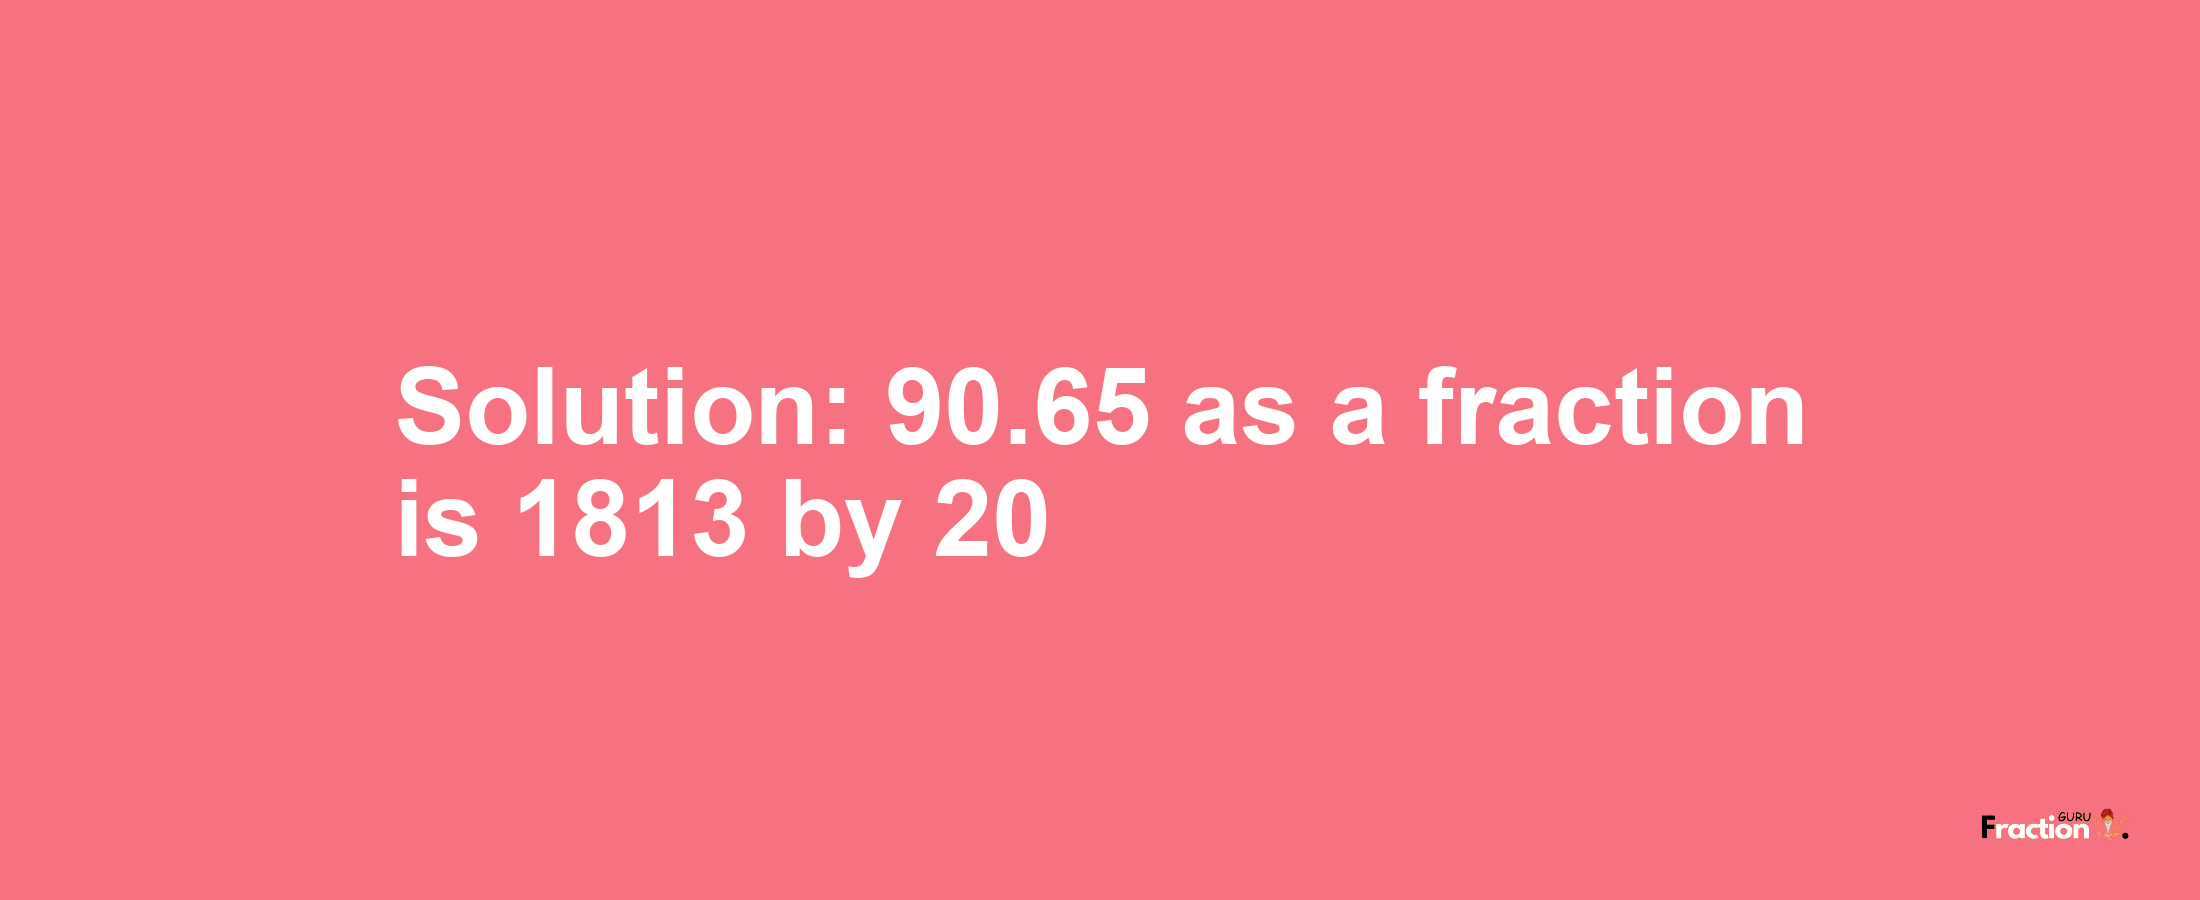 Solution:90.65 as a fraction is 1813/20